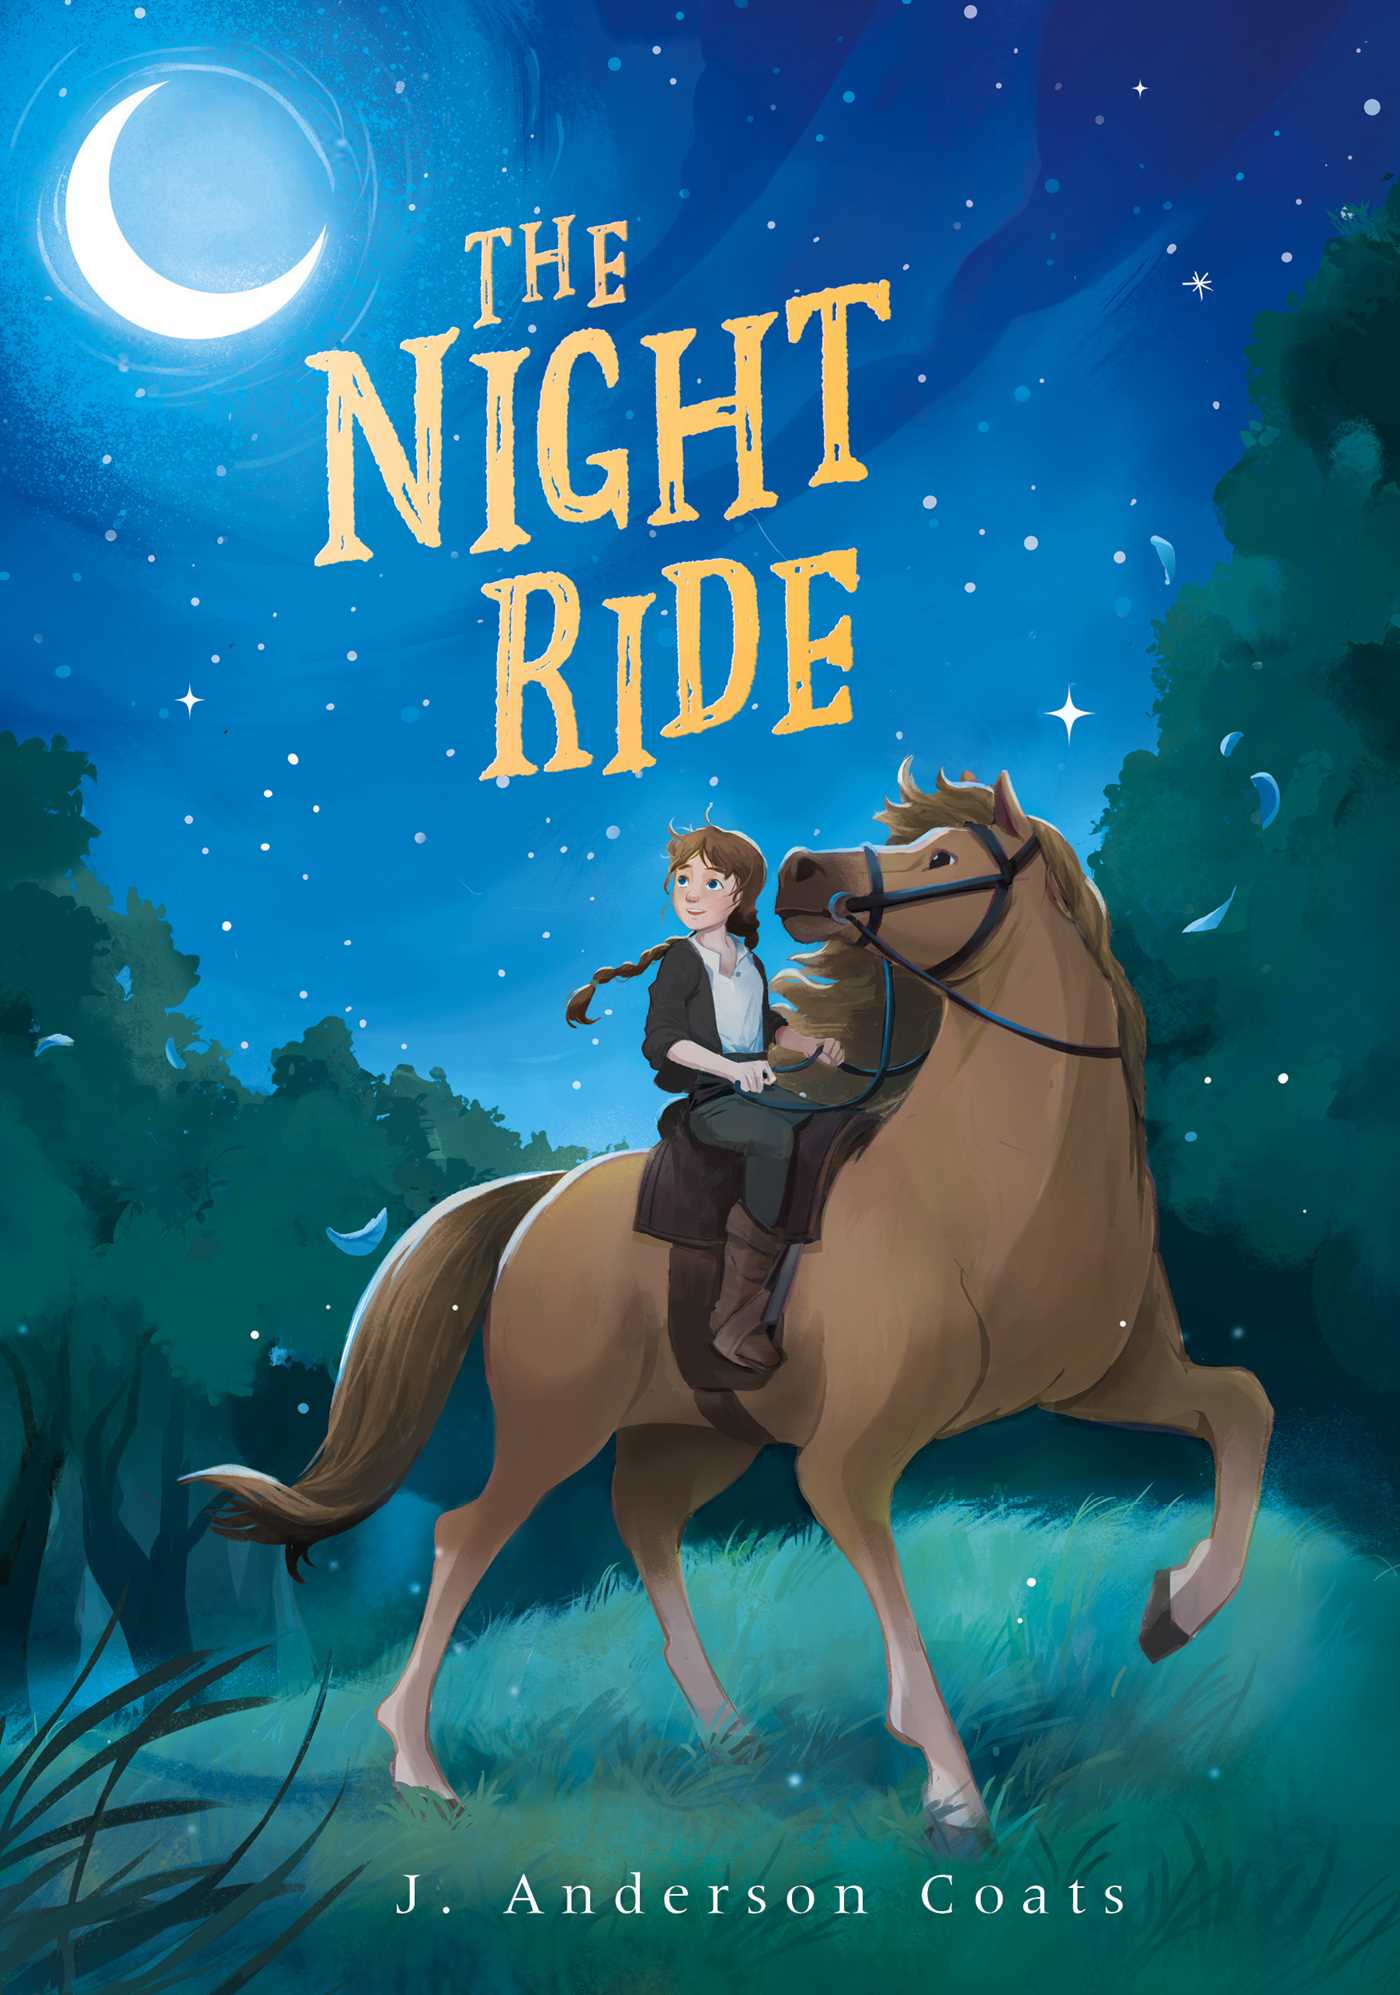 Image for "The Night Ride"